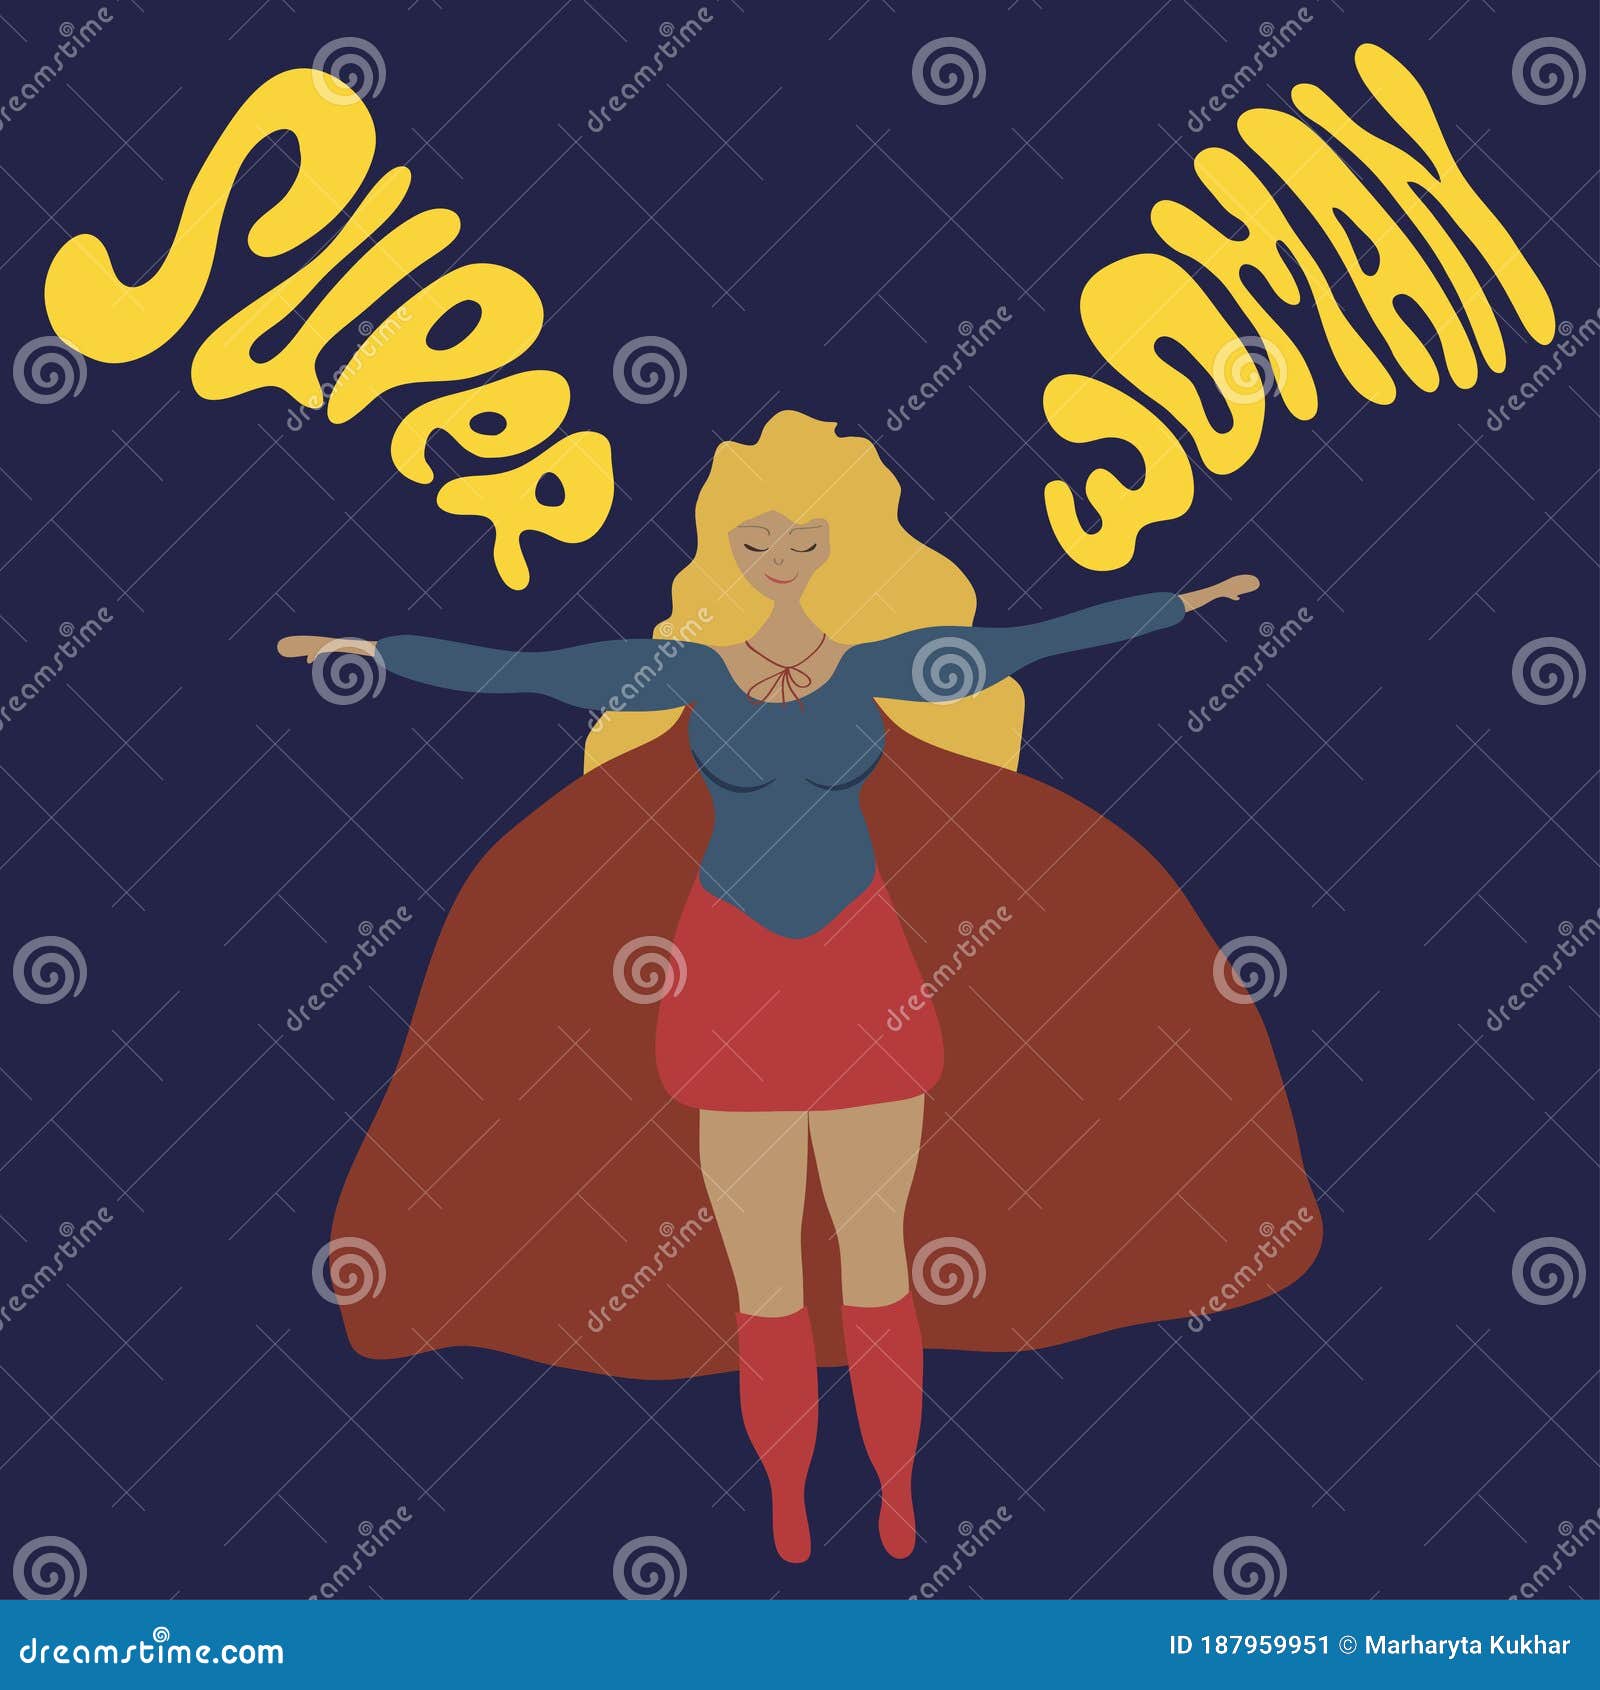 Sayings and superwoman quotes 238 Wise